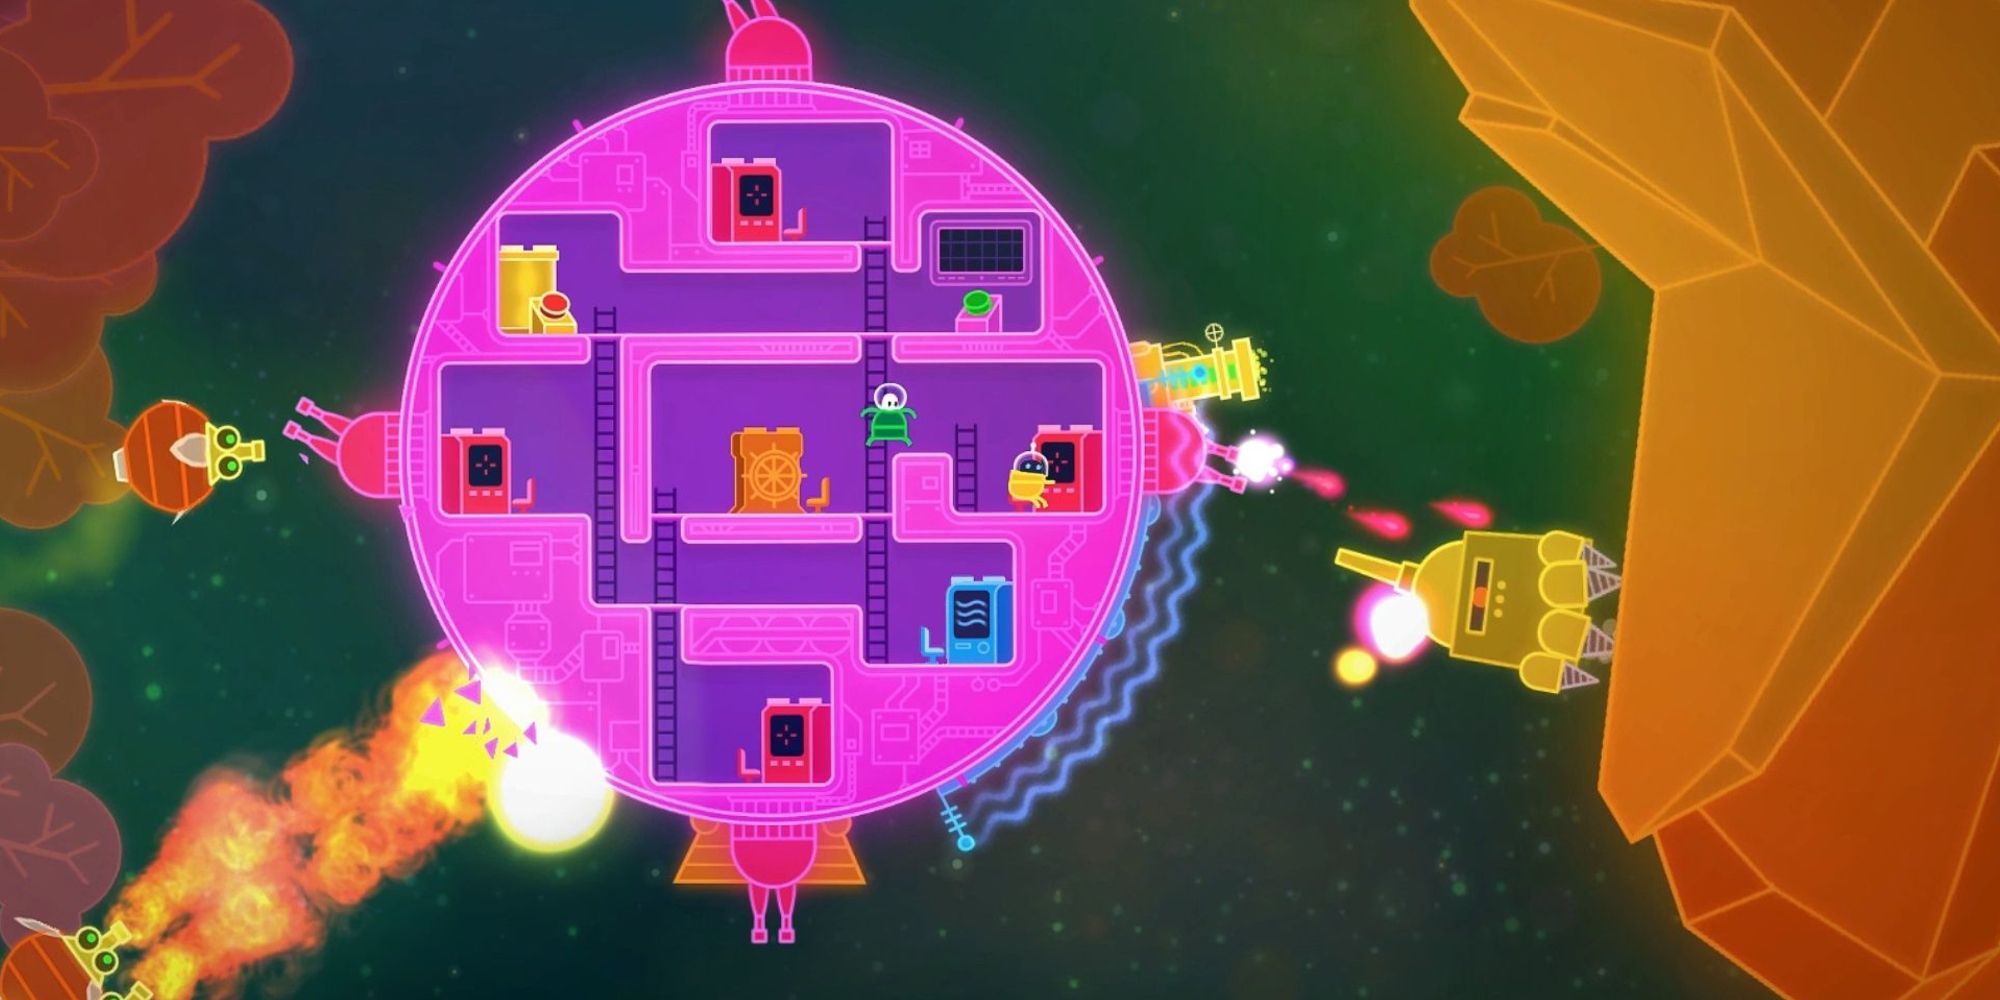 The spaceship from Lovers in a Dangerous Spacetime